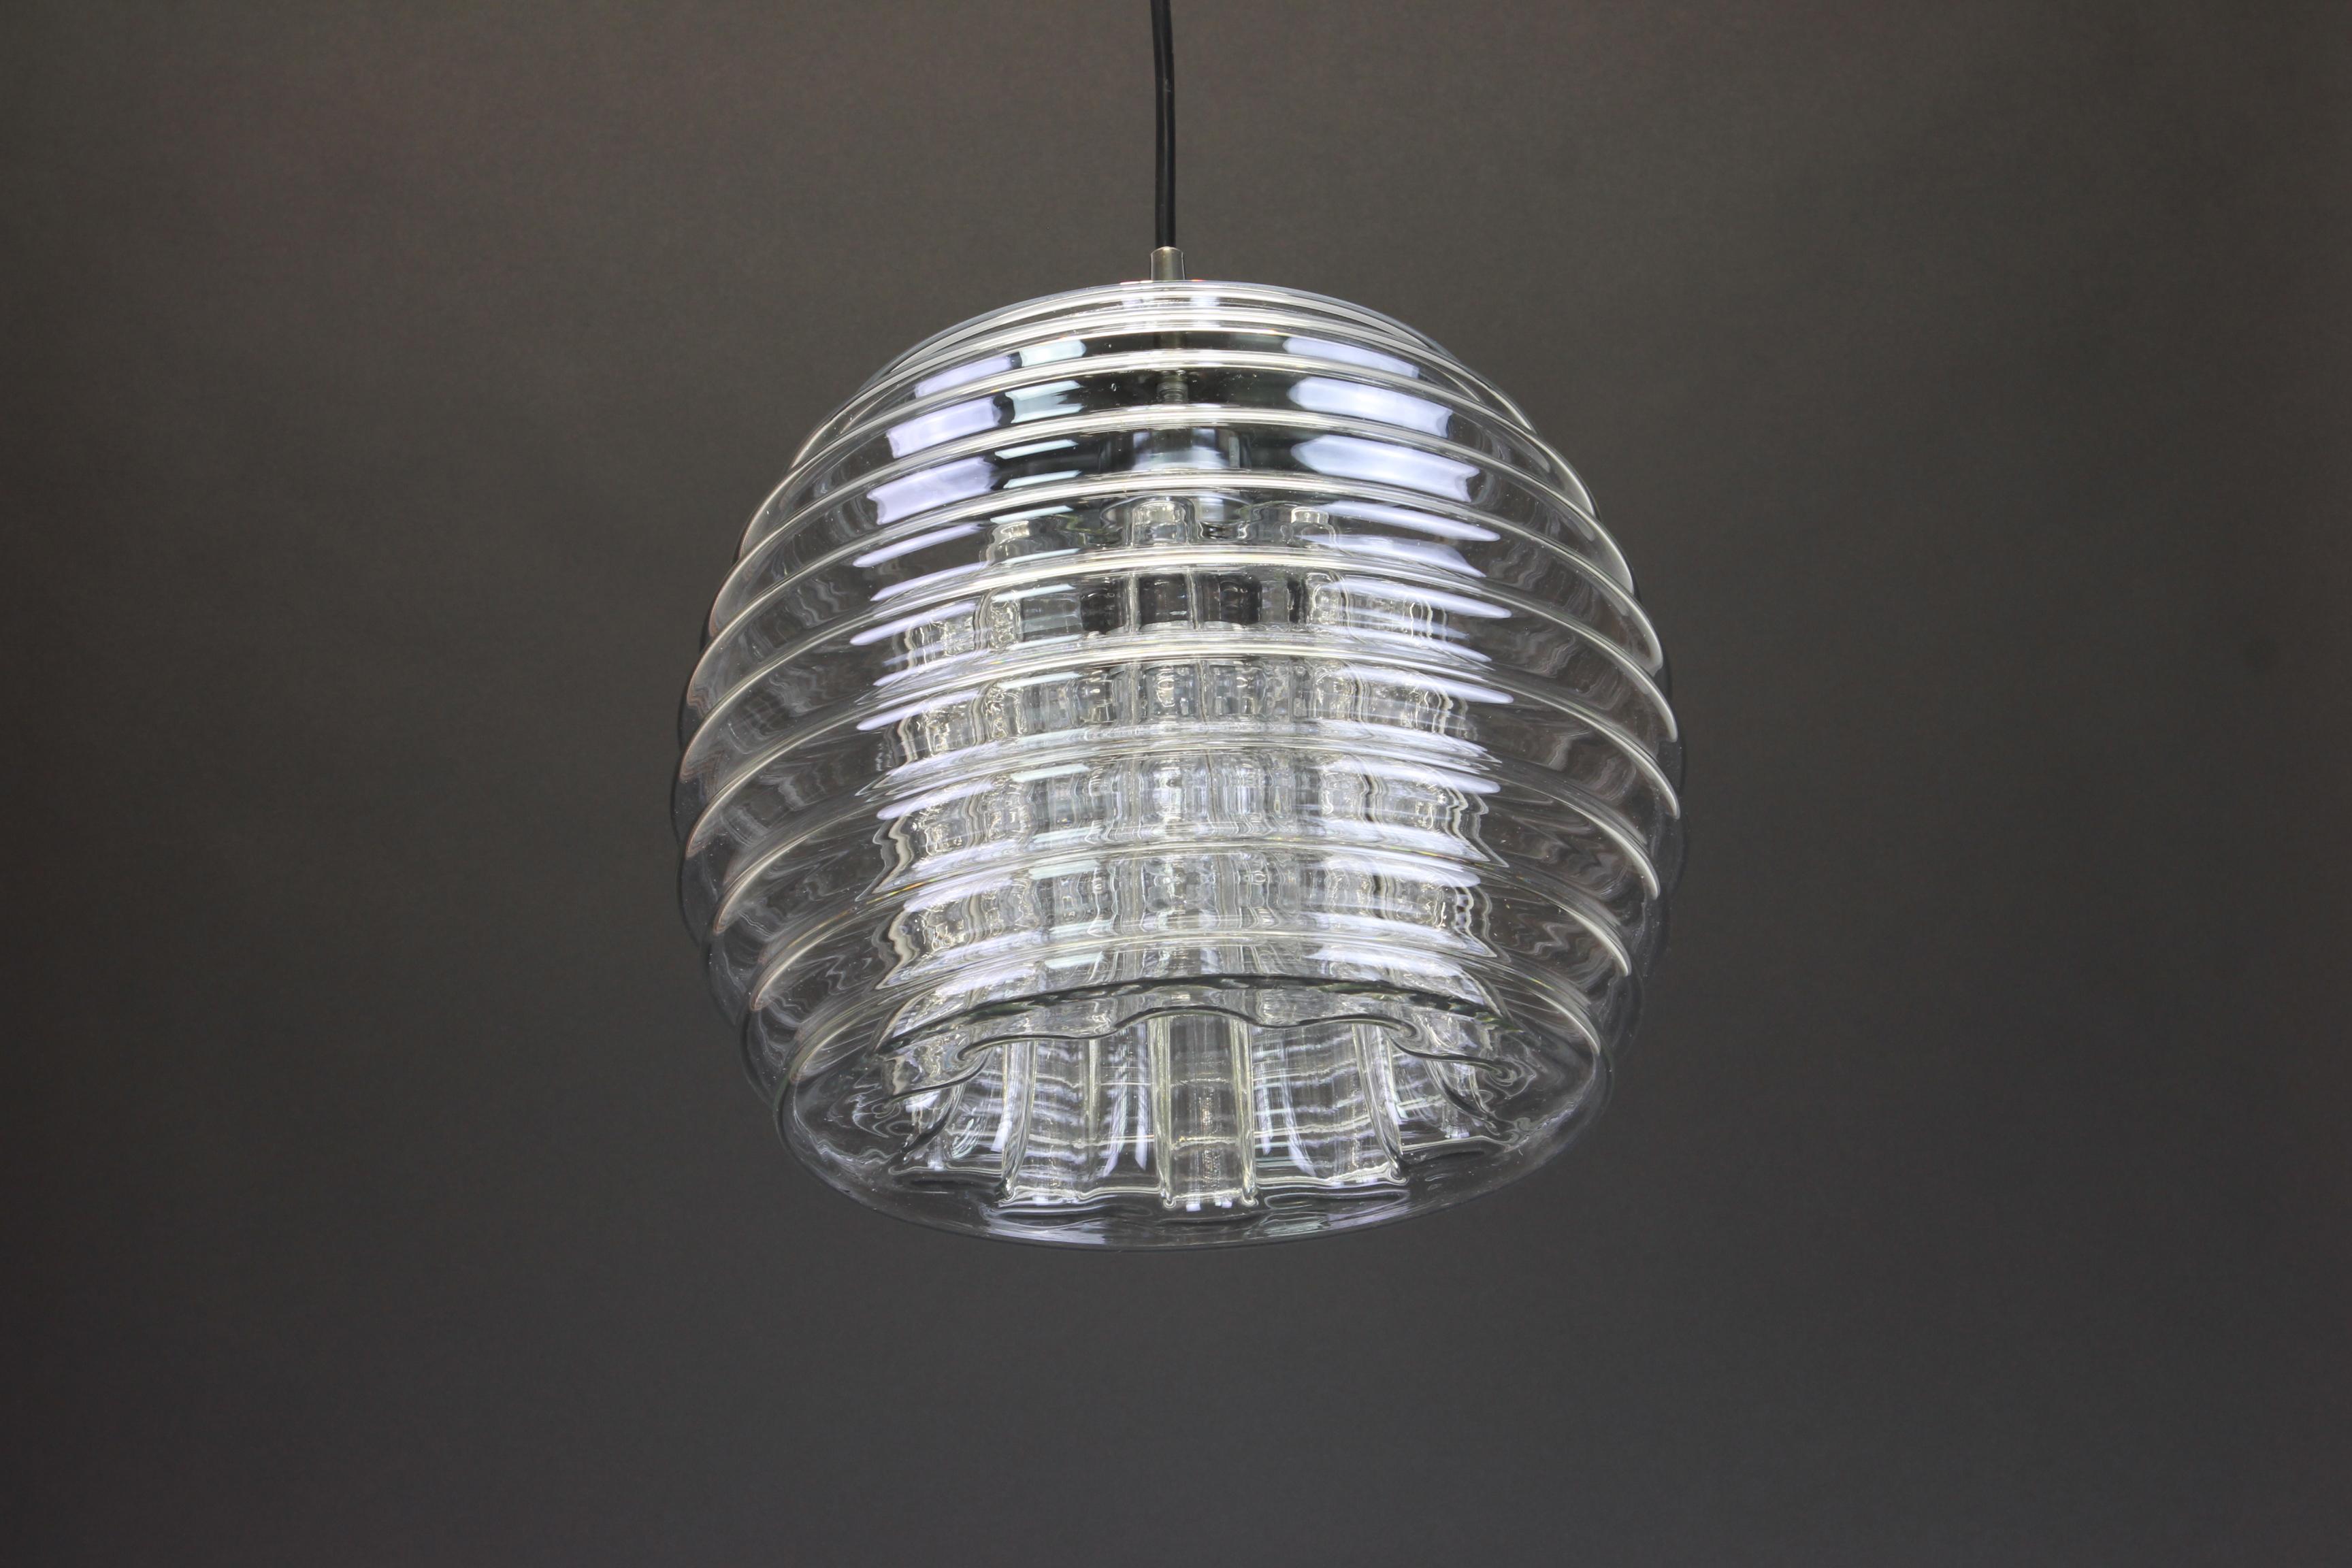 A special round biomorphic glass pendant designed by Koch & Lowy for Peill & Putzler, manufactured in Germany, circa 1970s.

Sockets: One x E27 standard bulb. (100 W max).
Drop rod can be adjusted as required, free of charge, for greater or